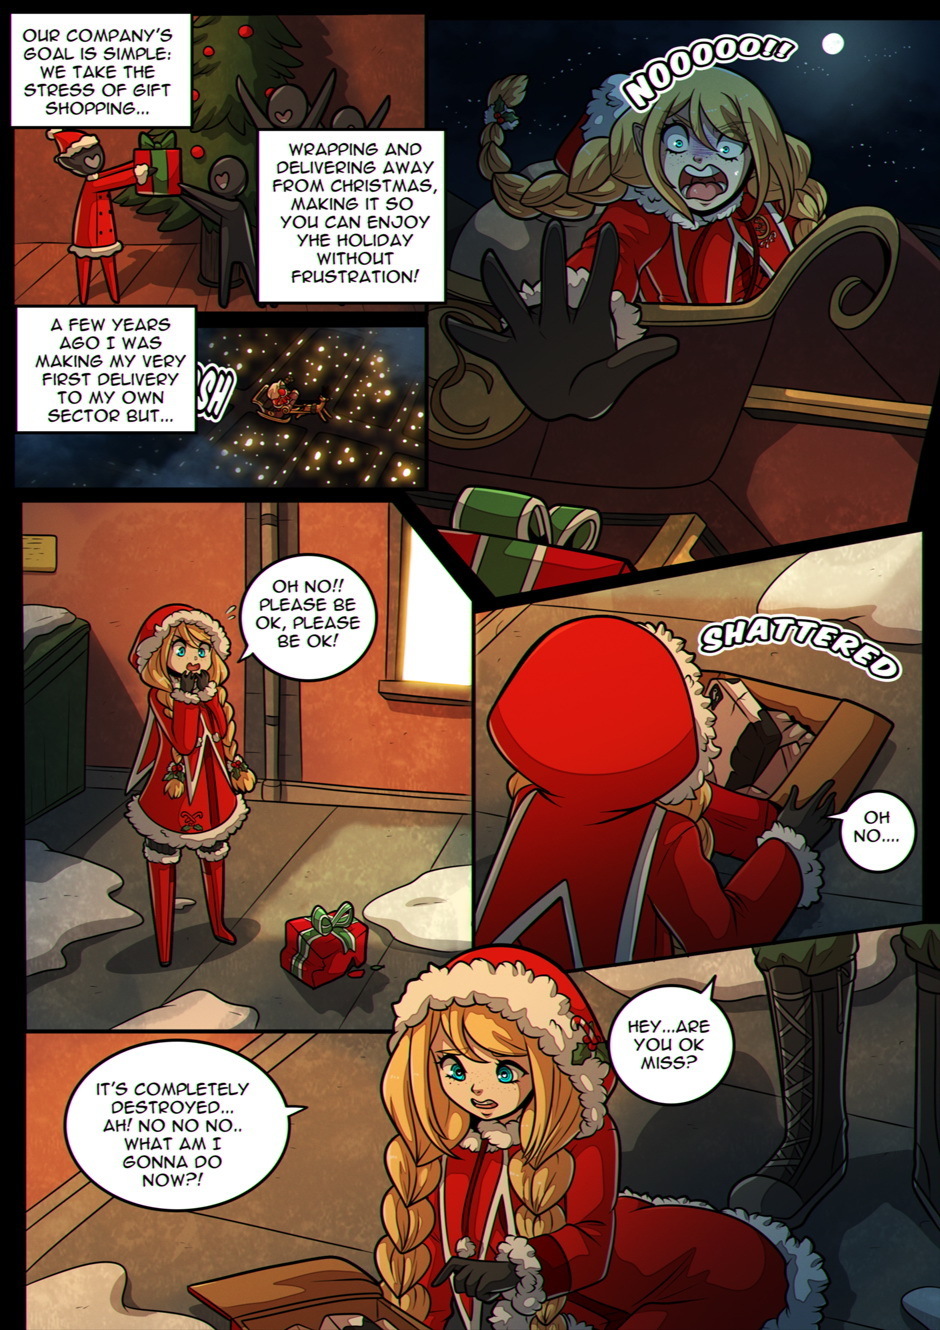 A Holly Holidays - Page 8